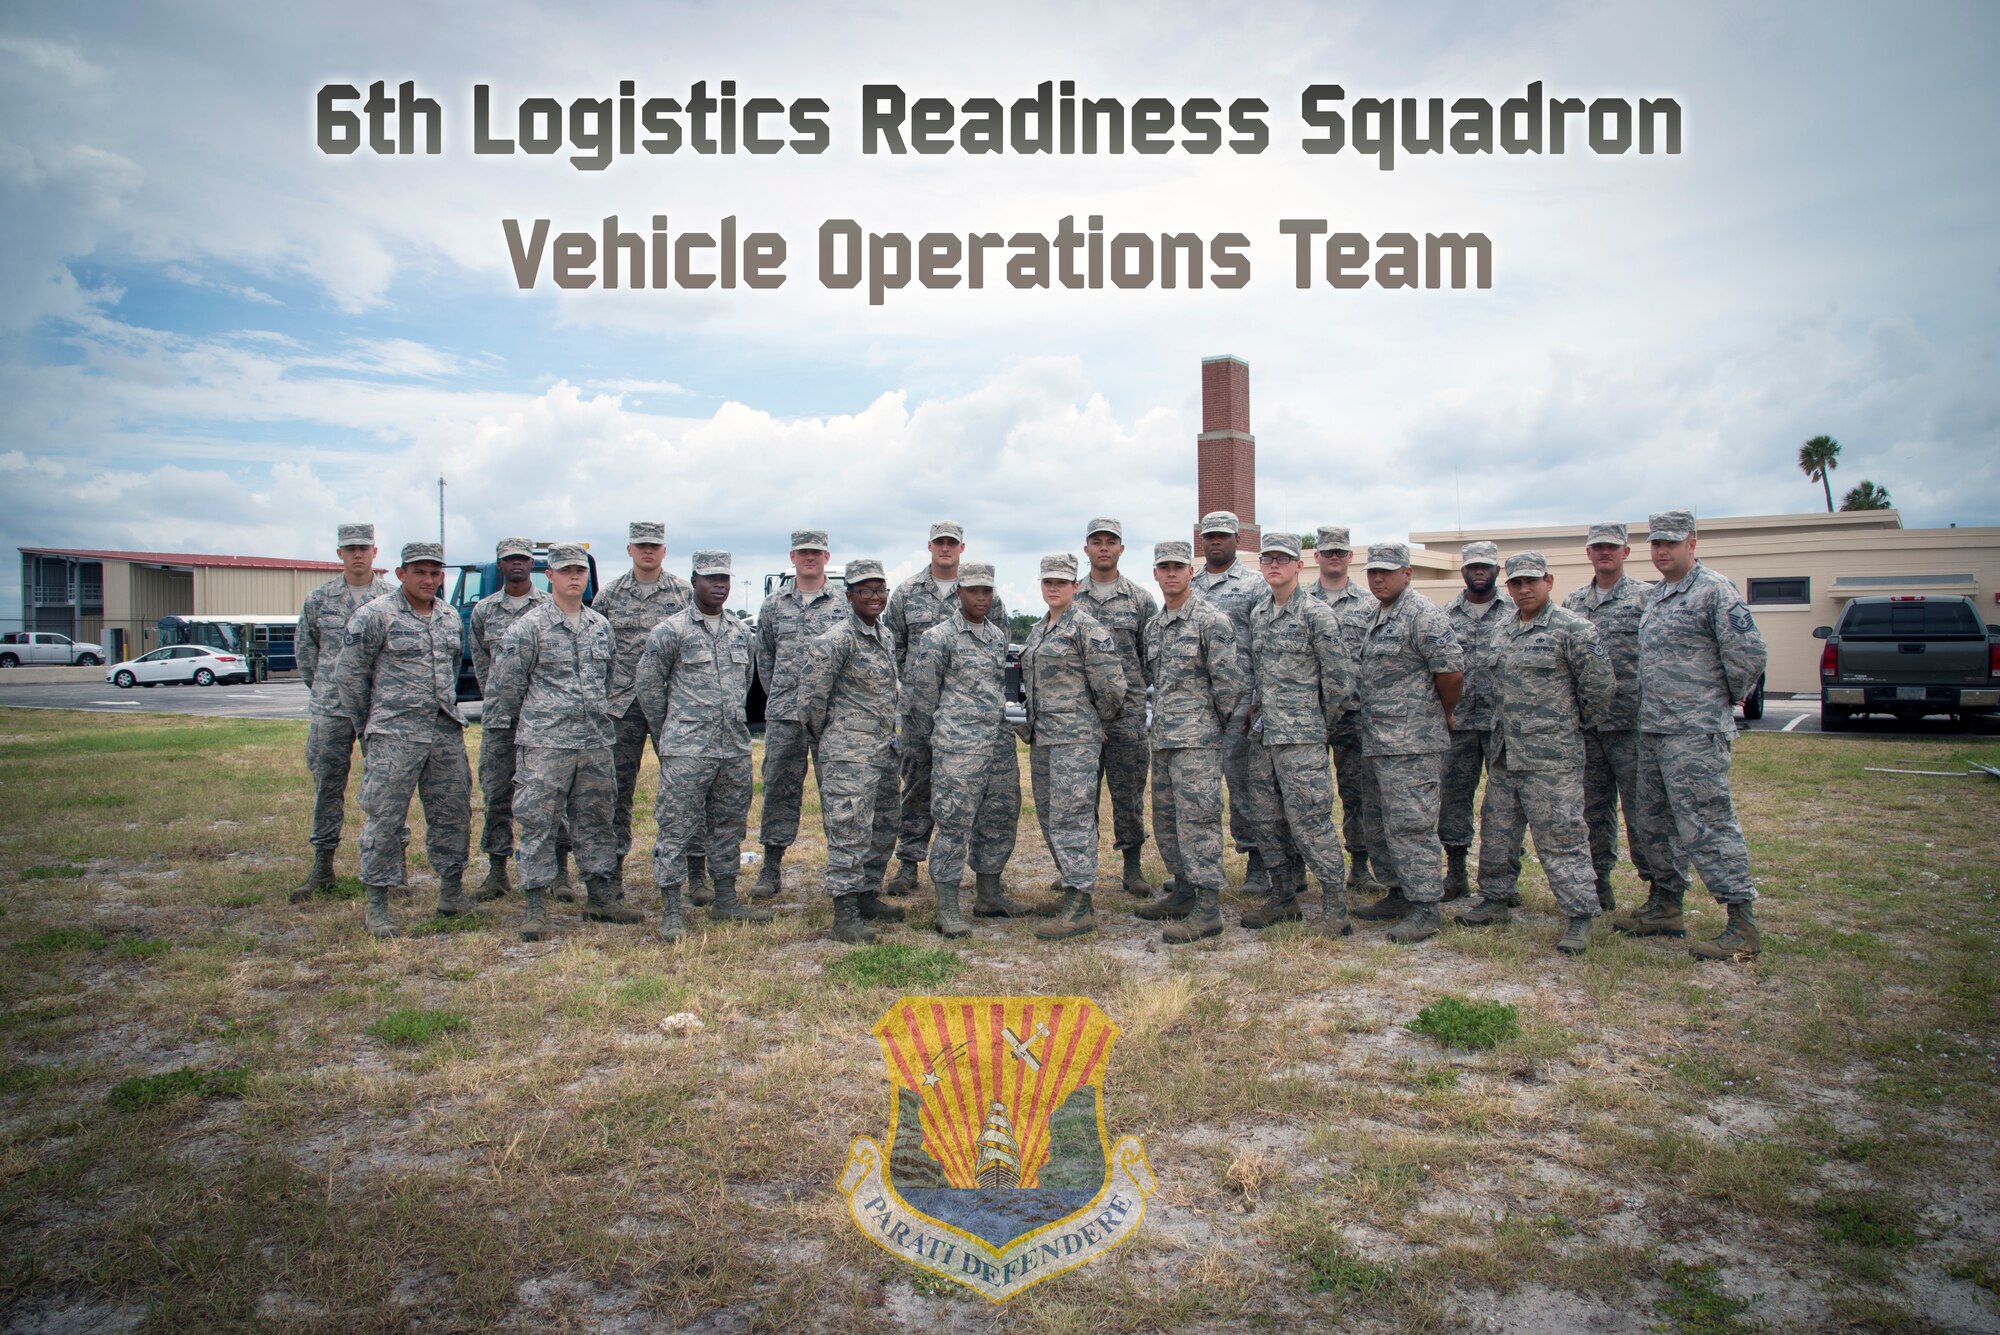 U.S Air Force Airmen assigned to the 6th Logistics Readiness Squadron Vehicle Operations team, paused for a photo at MacDill Air Force Base, Florida, June 21, 2018.